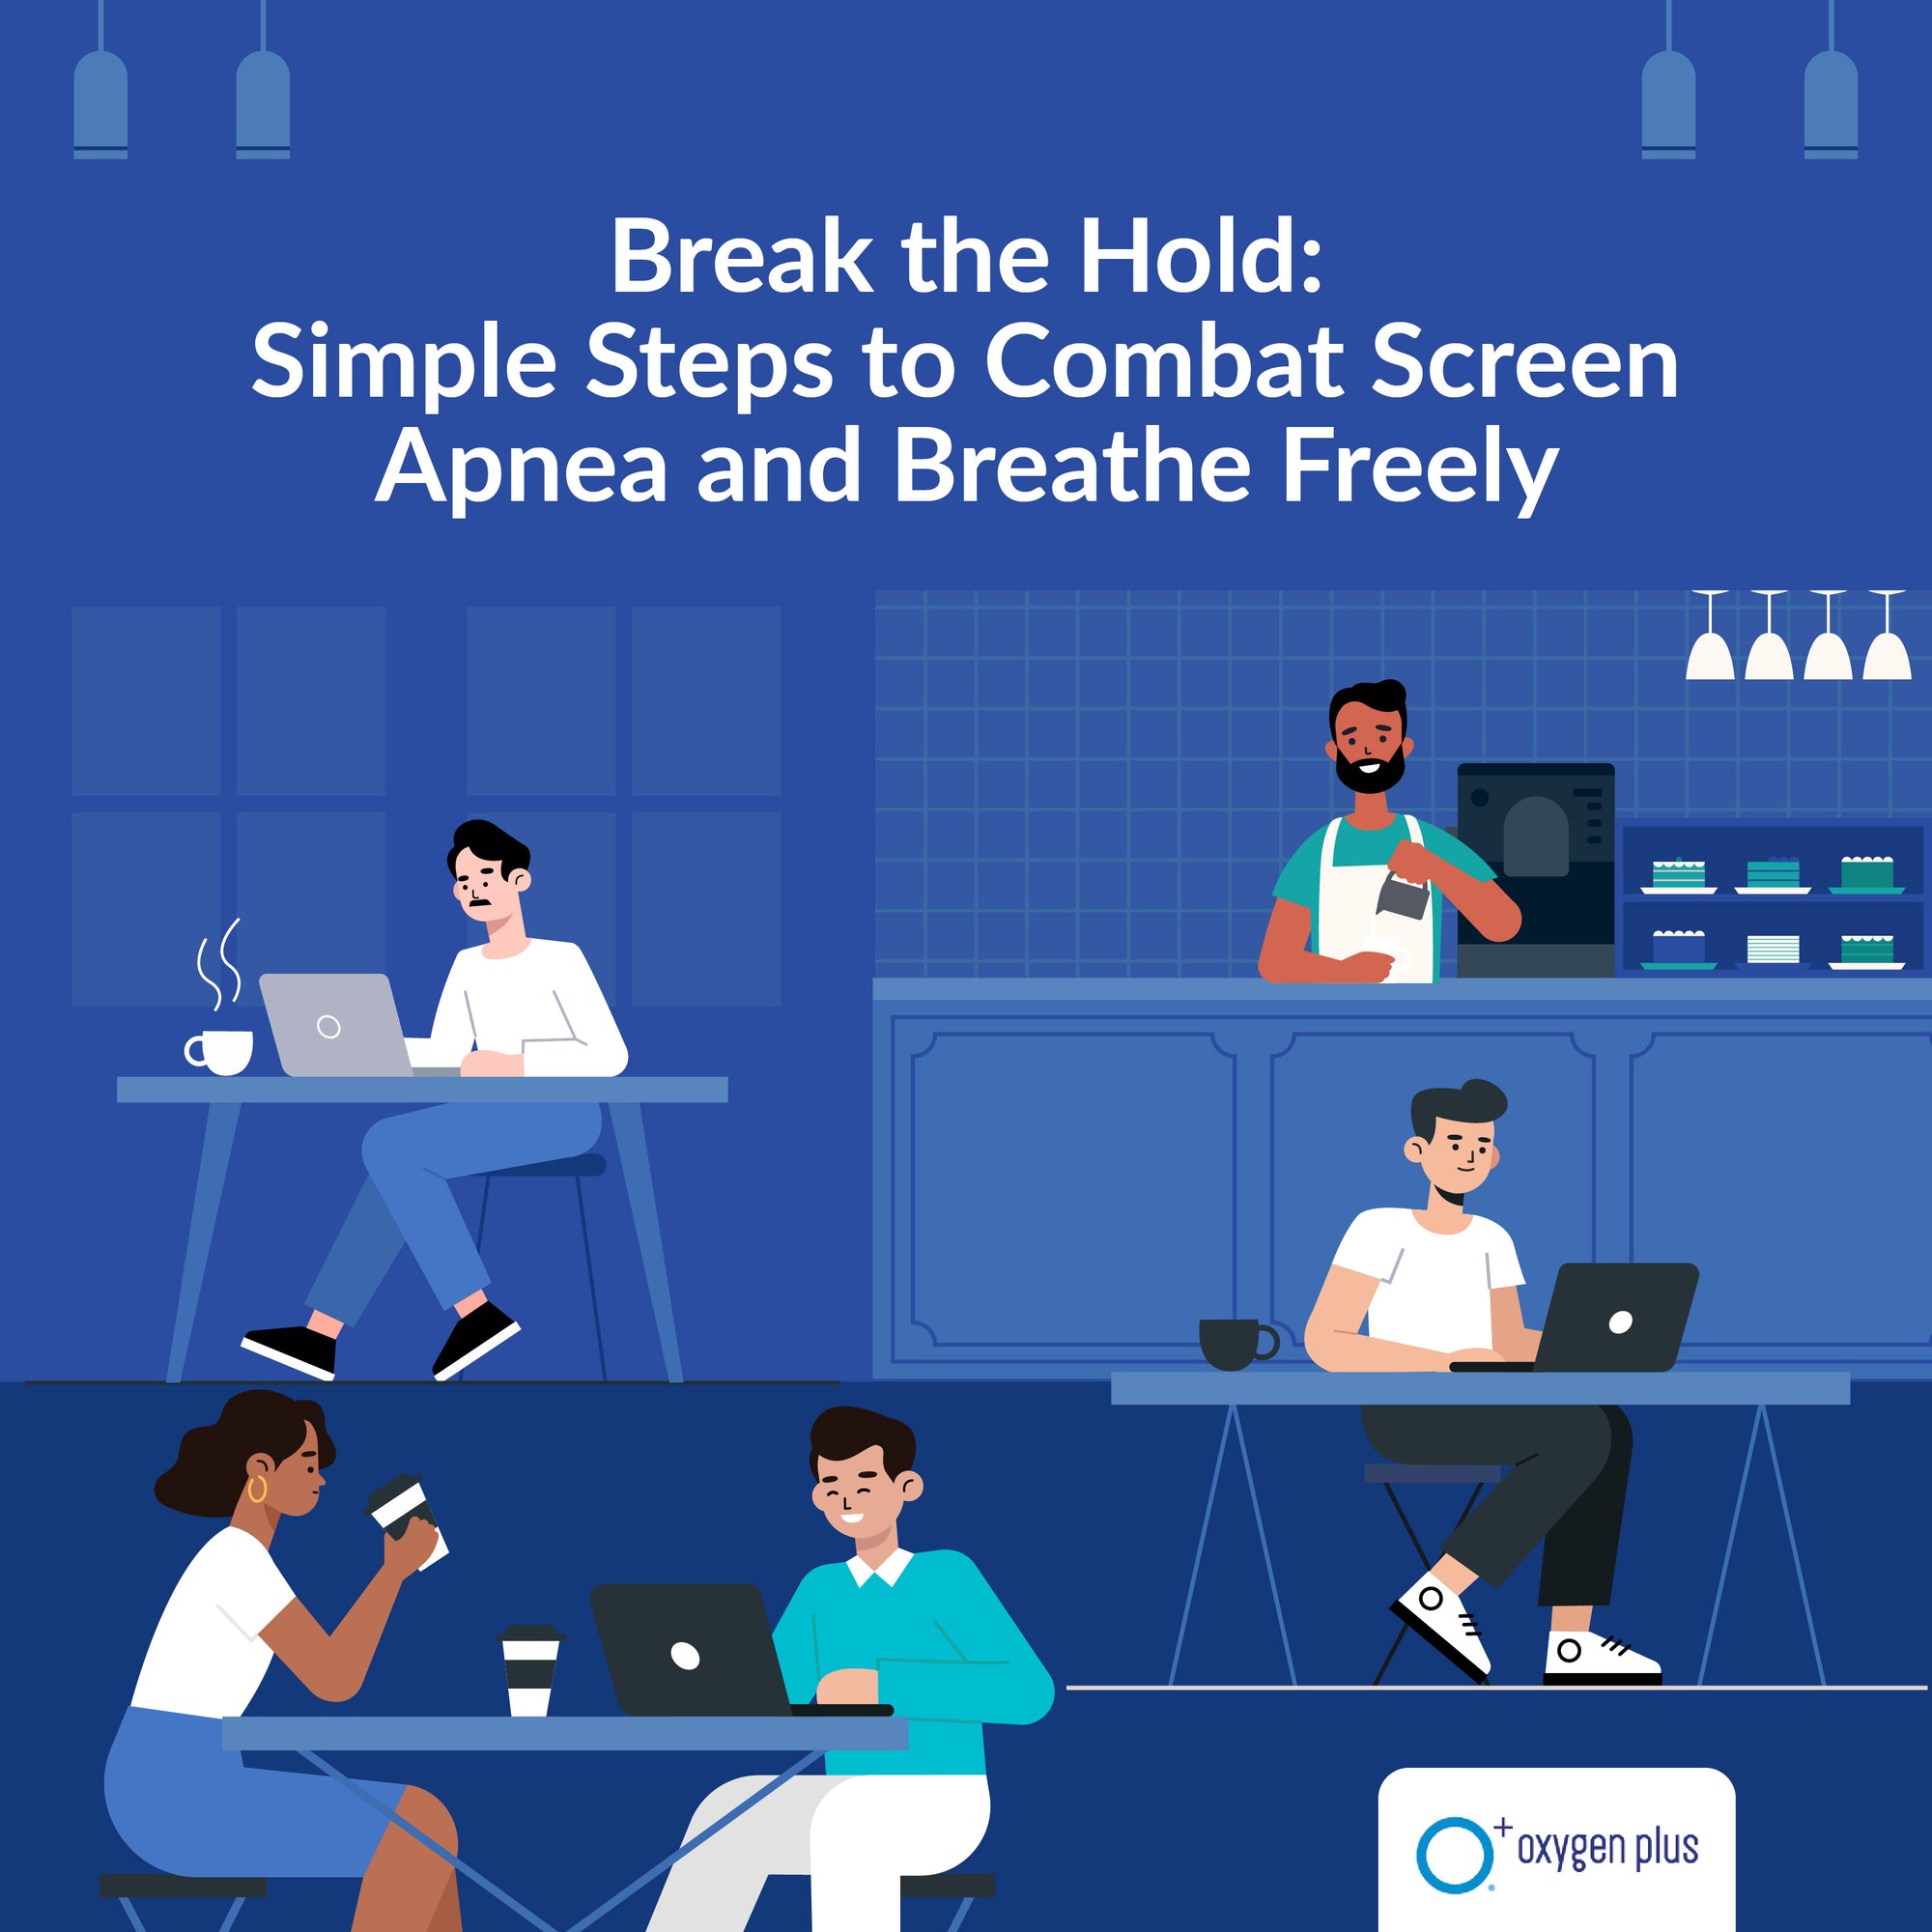 Simple steps to combat screen apnea and breathe freely